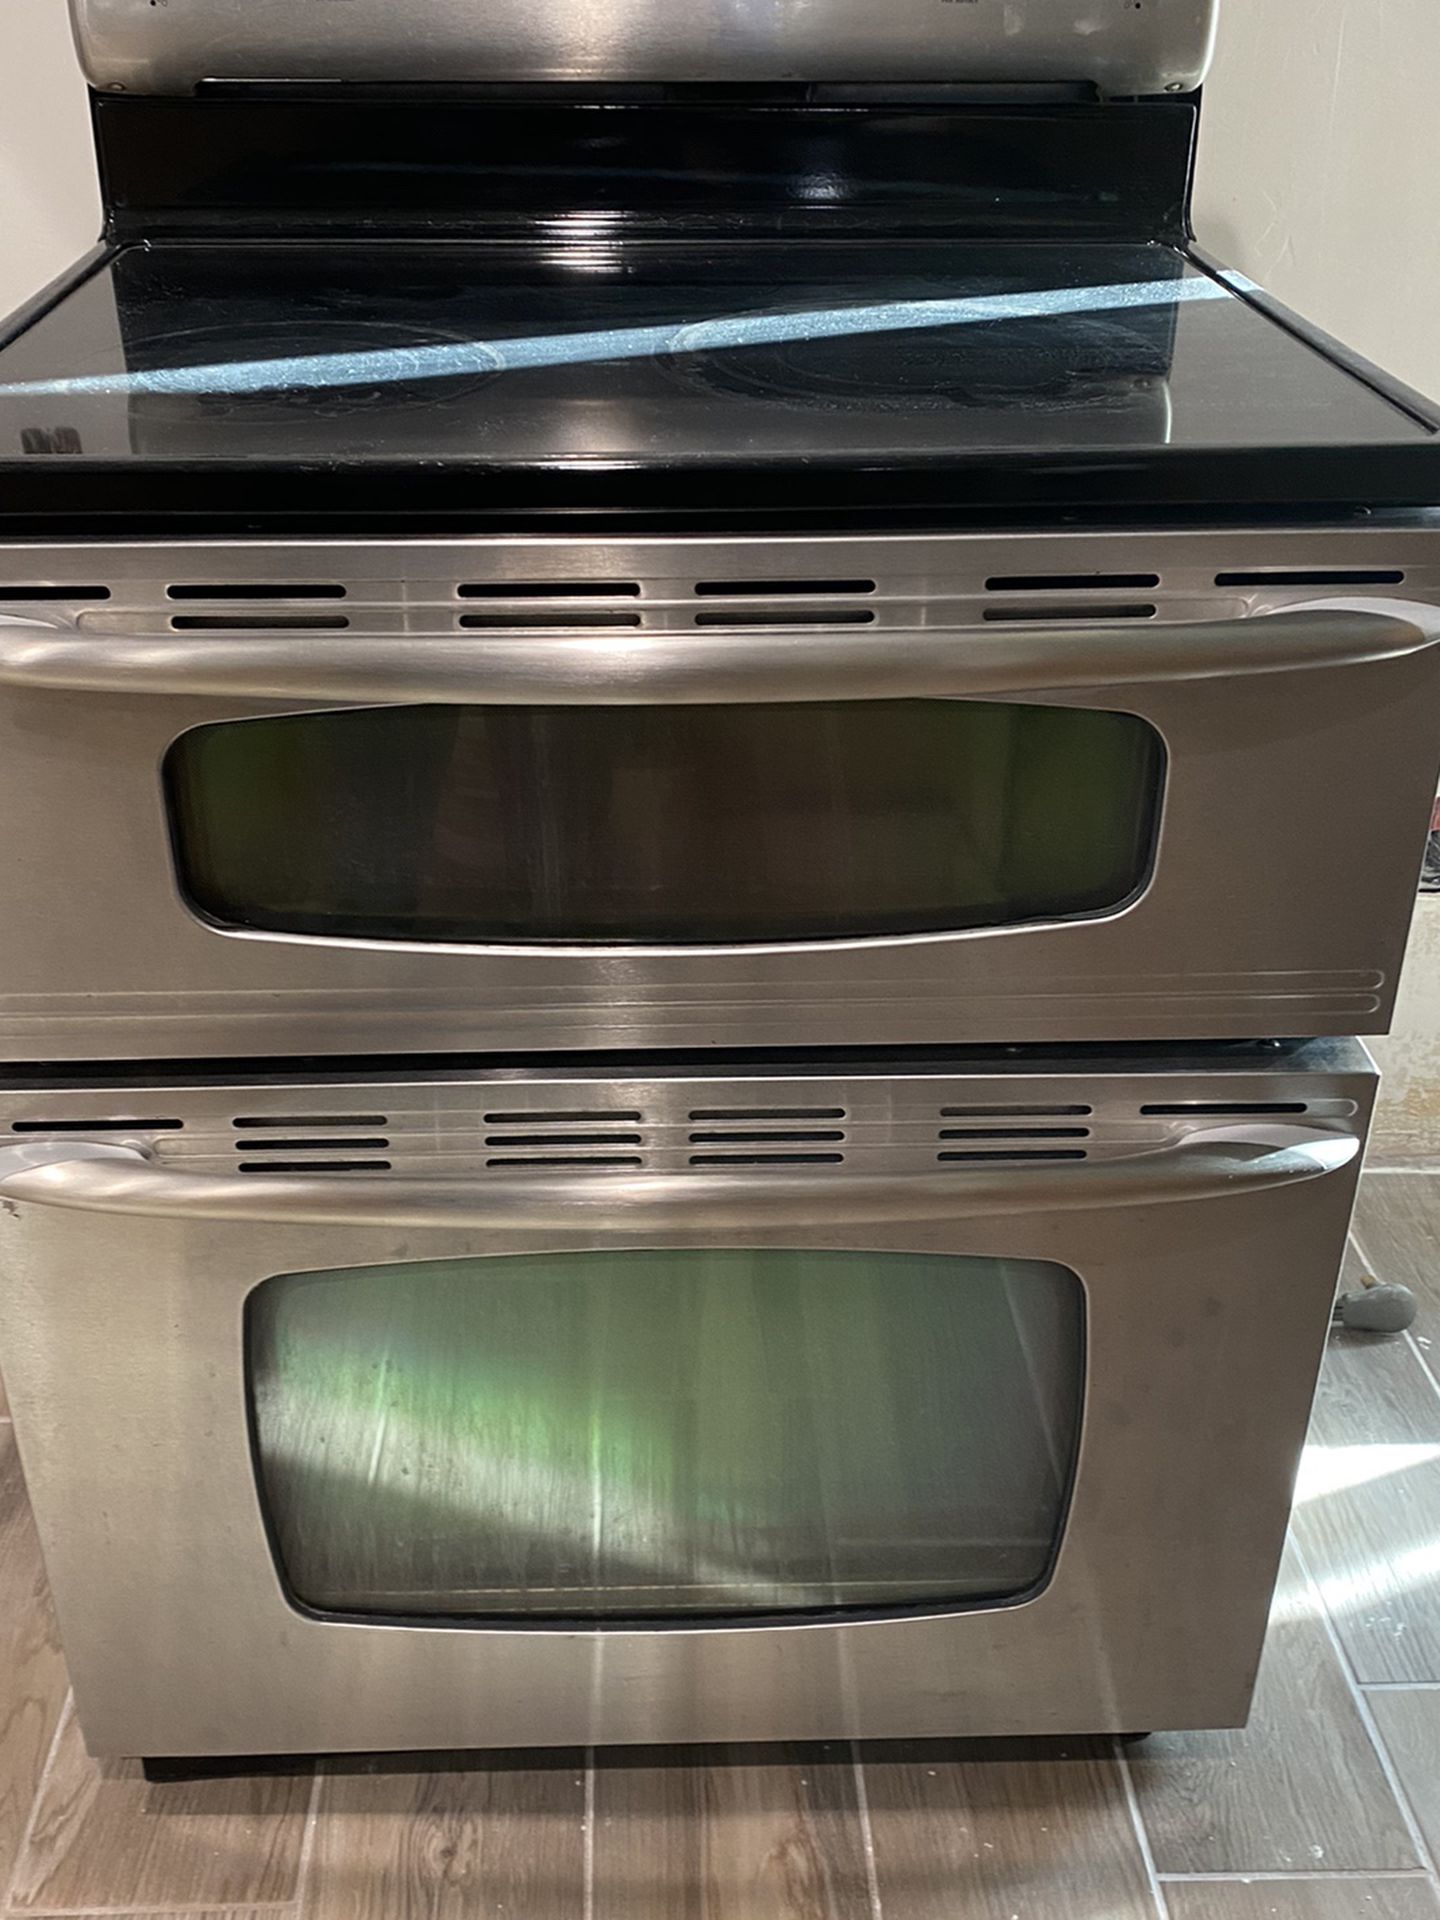 Maytag Gemini Range With Double Oven